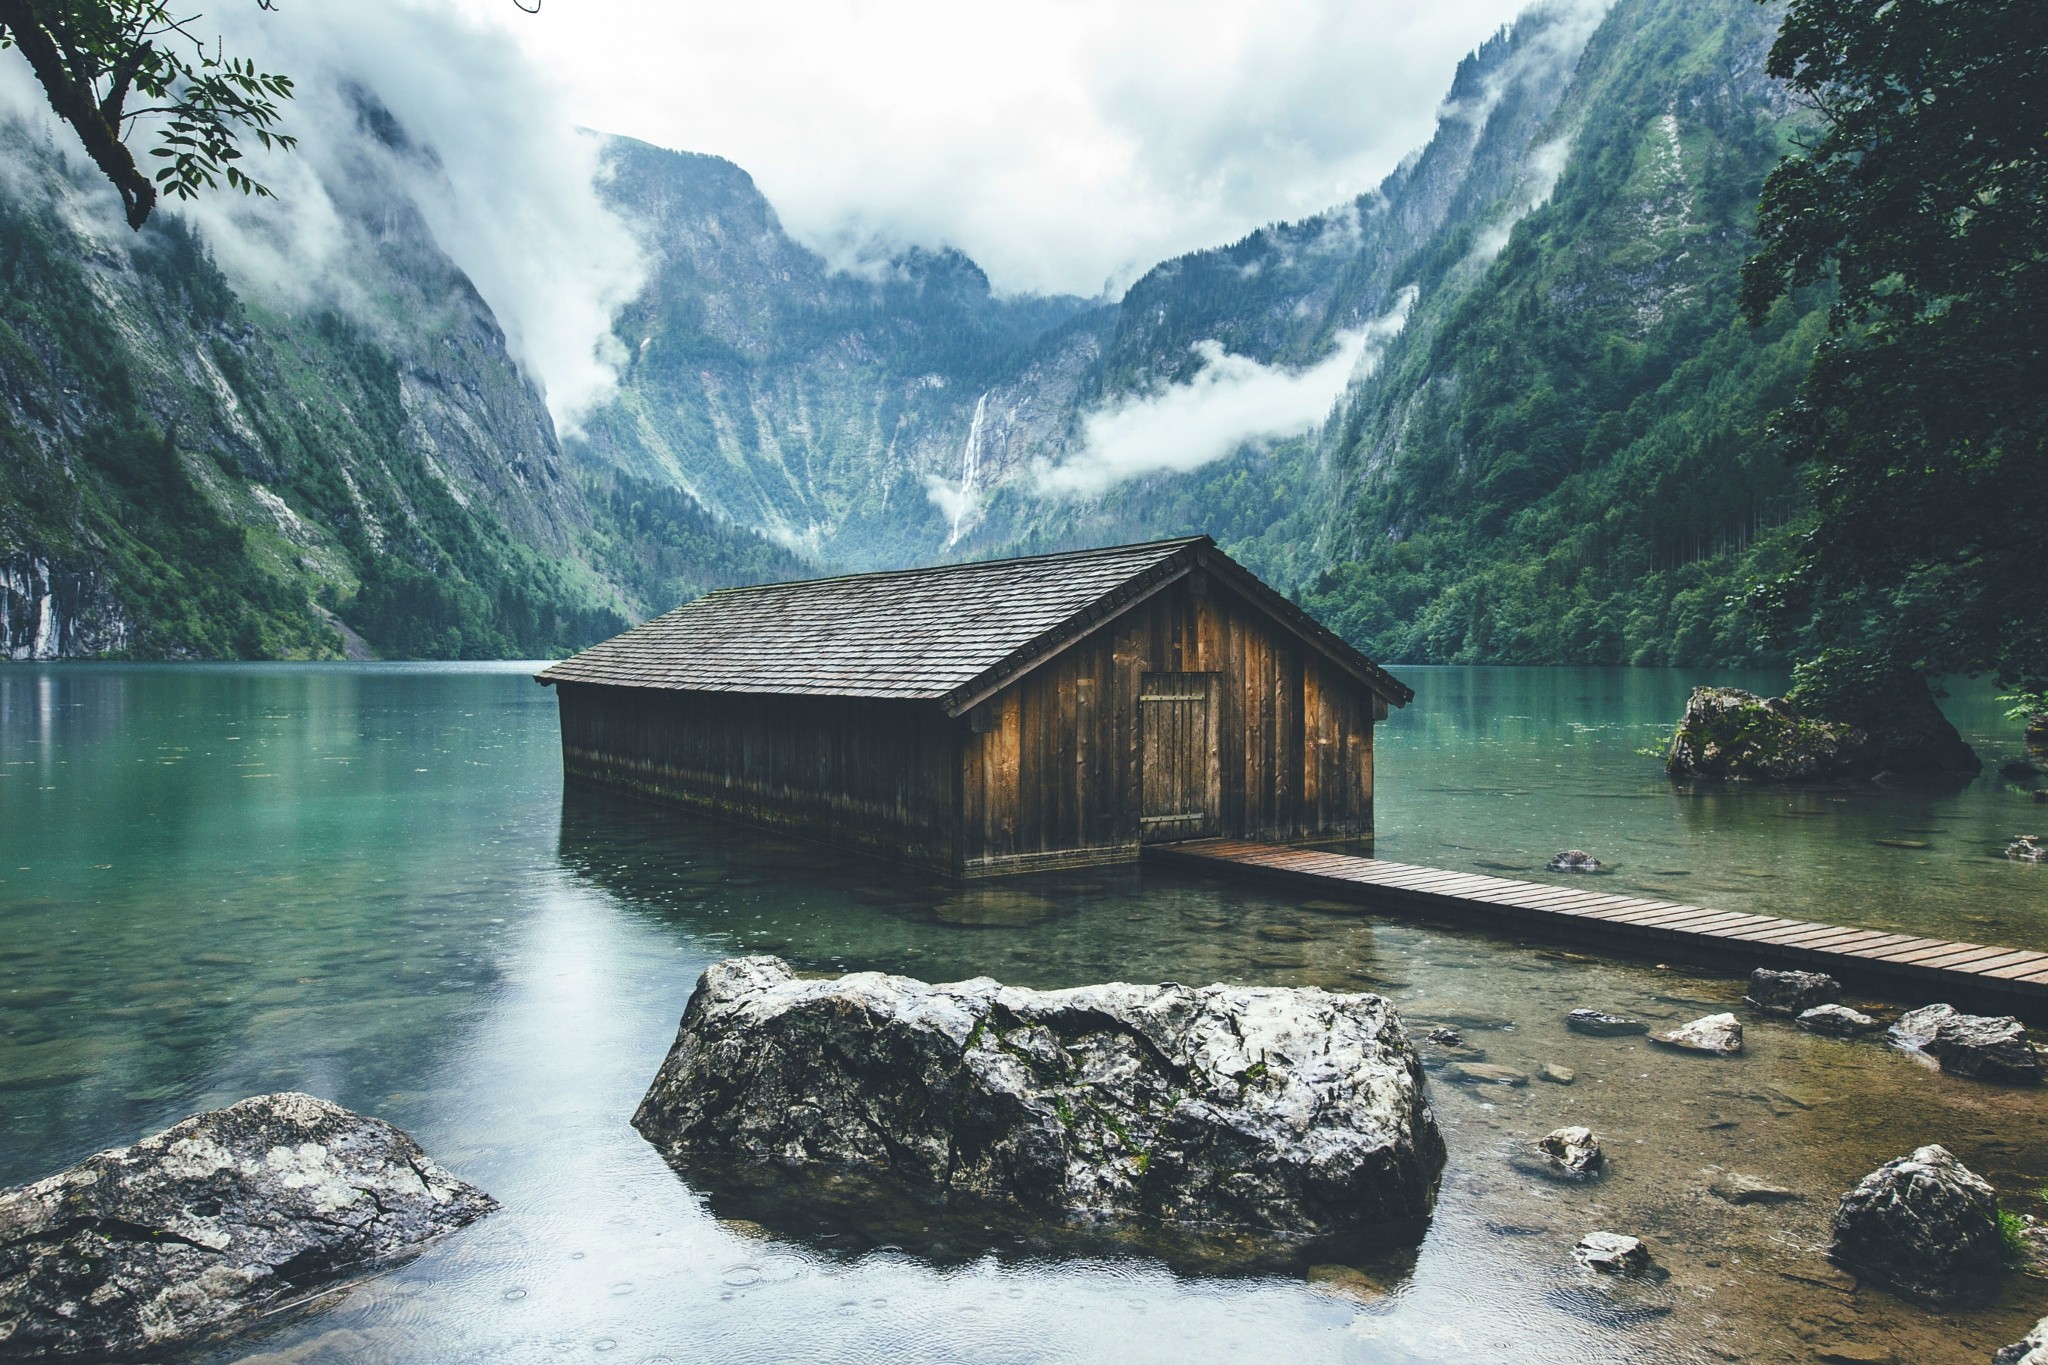 General 2048x1365 nature landscape lake boathouses Germany mountains forest clouds Berchtesgaden National Park Obersee